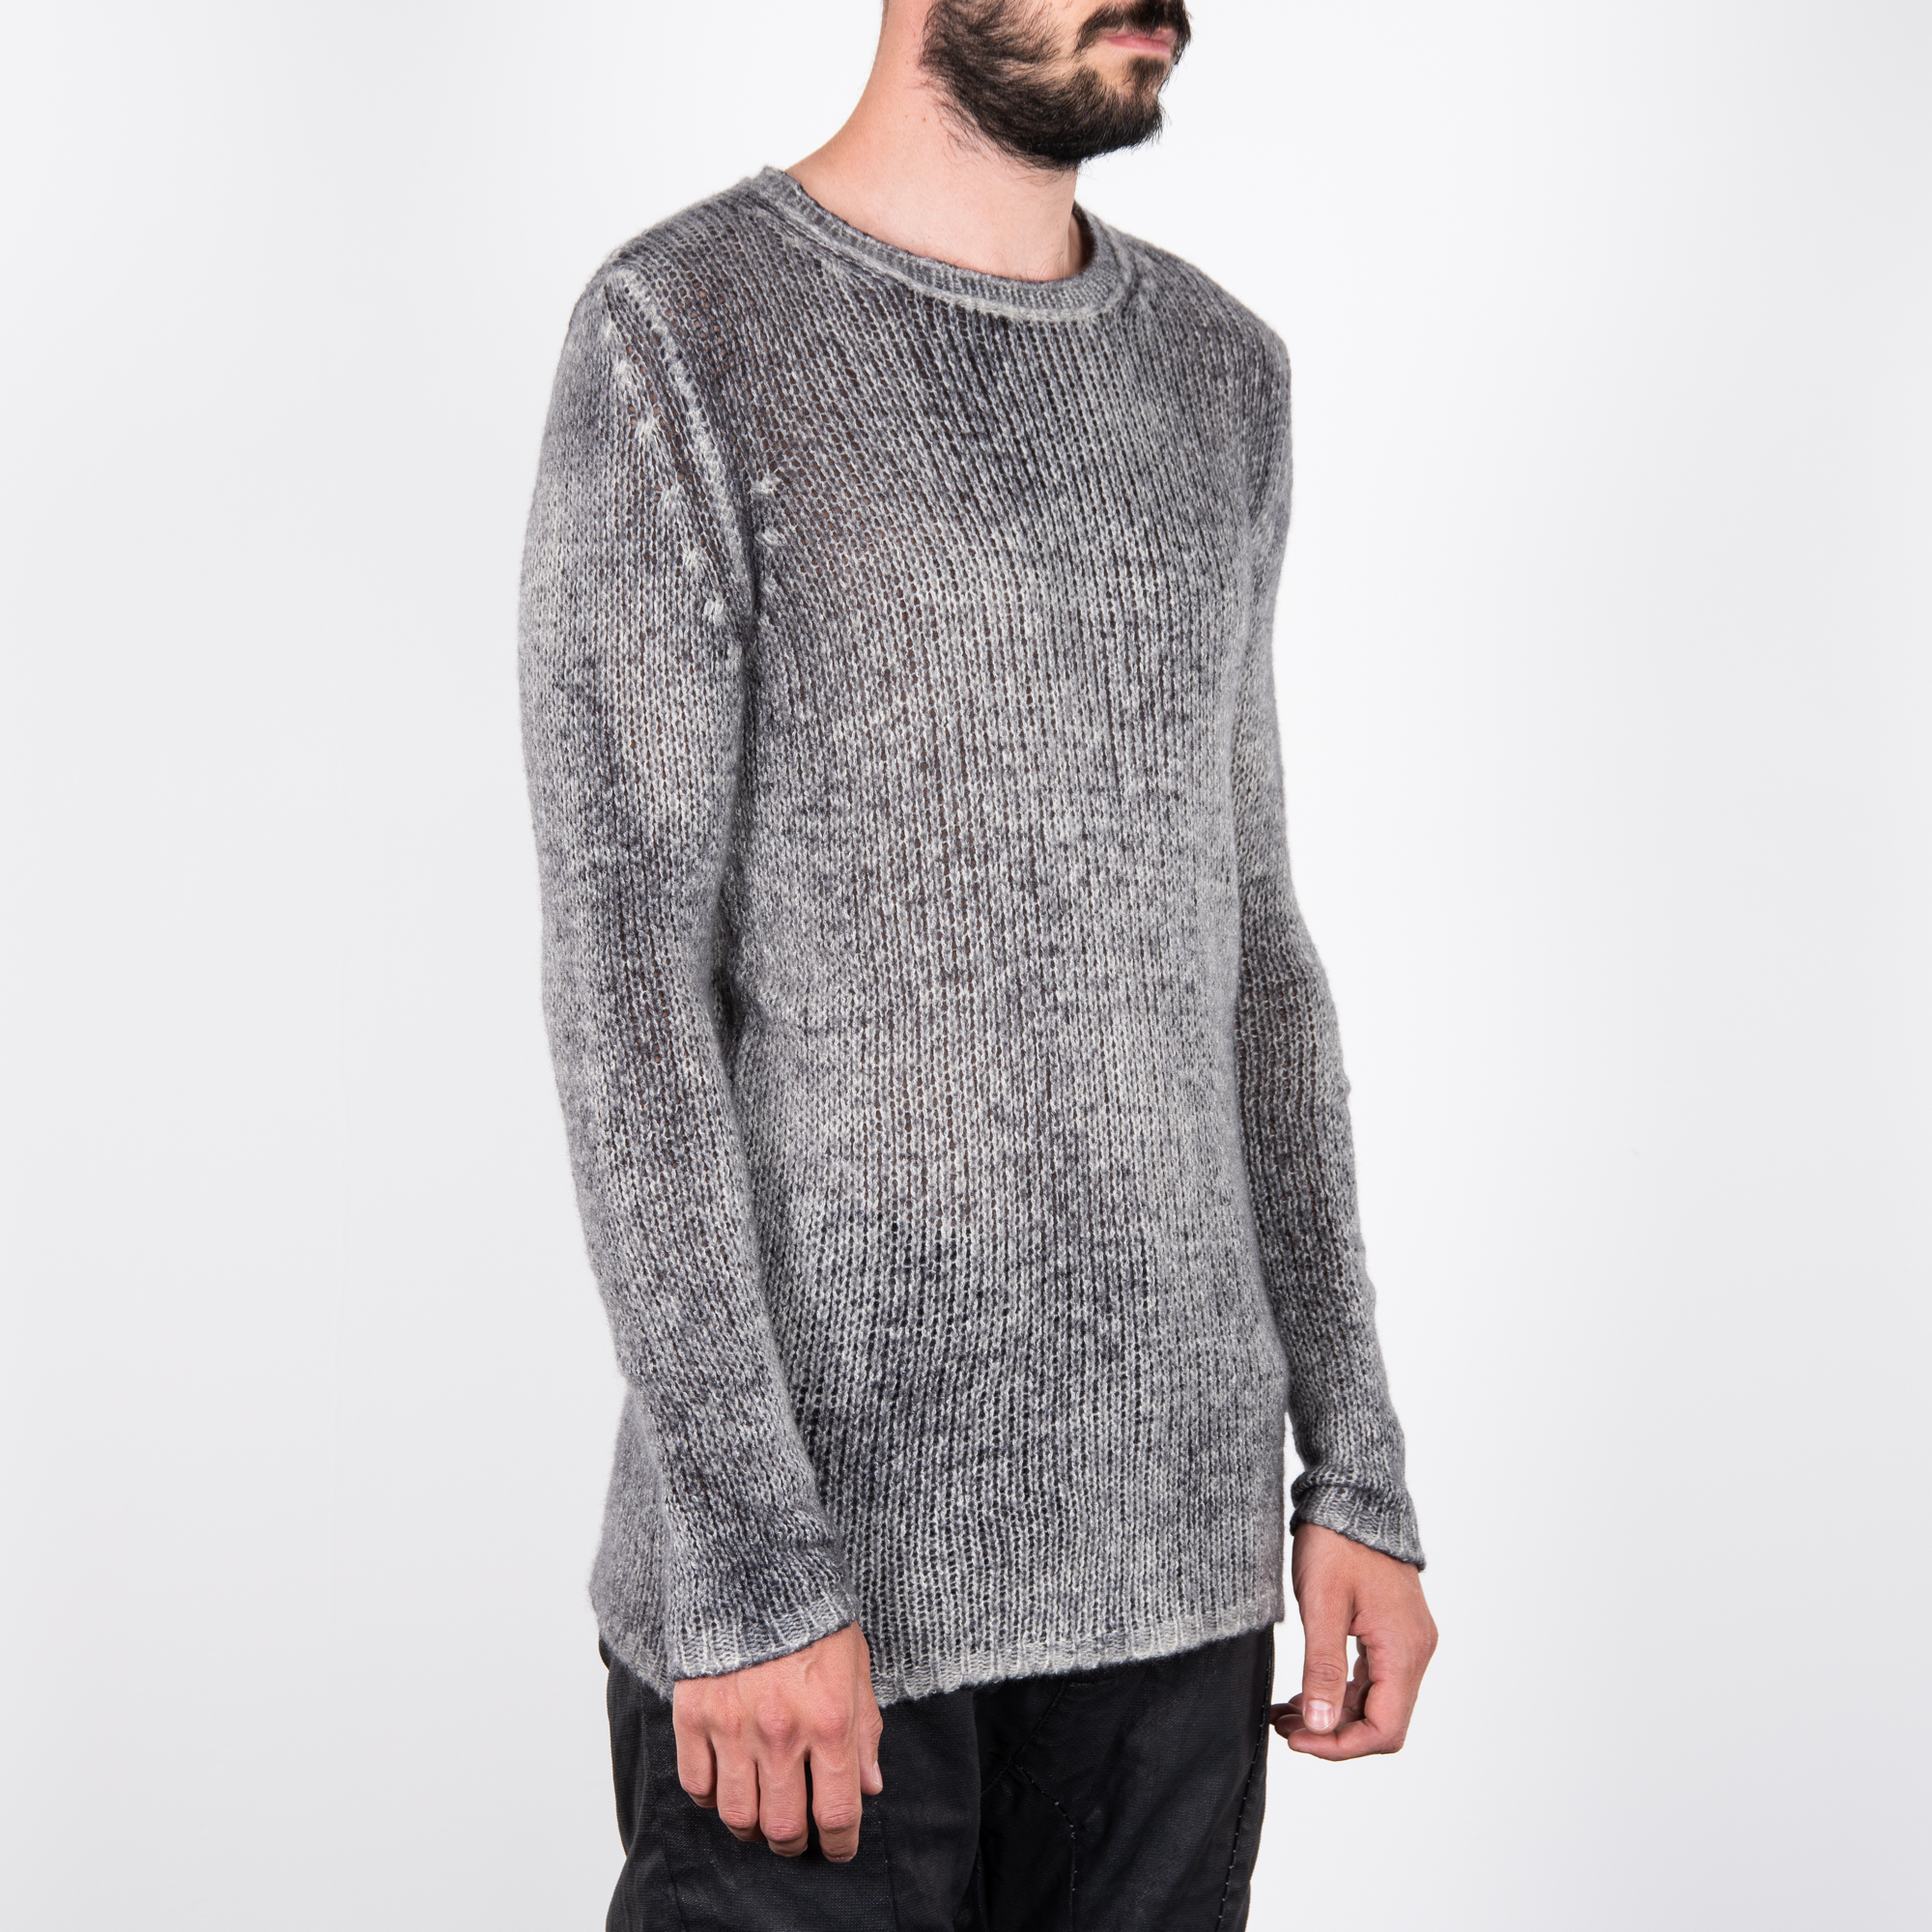 ROTITA Light Grey Inclined Button Long Sleeve Sweater 